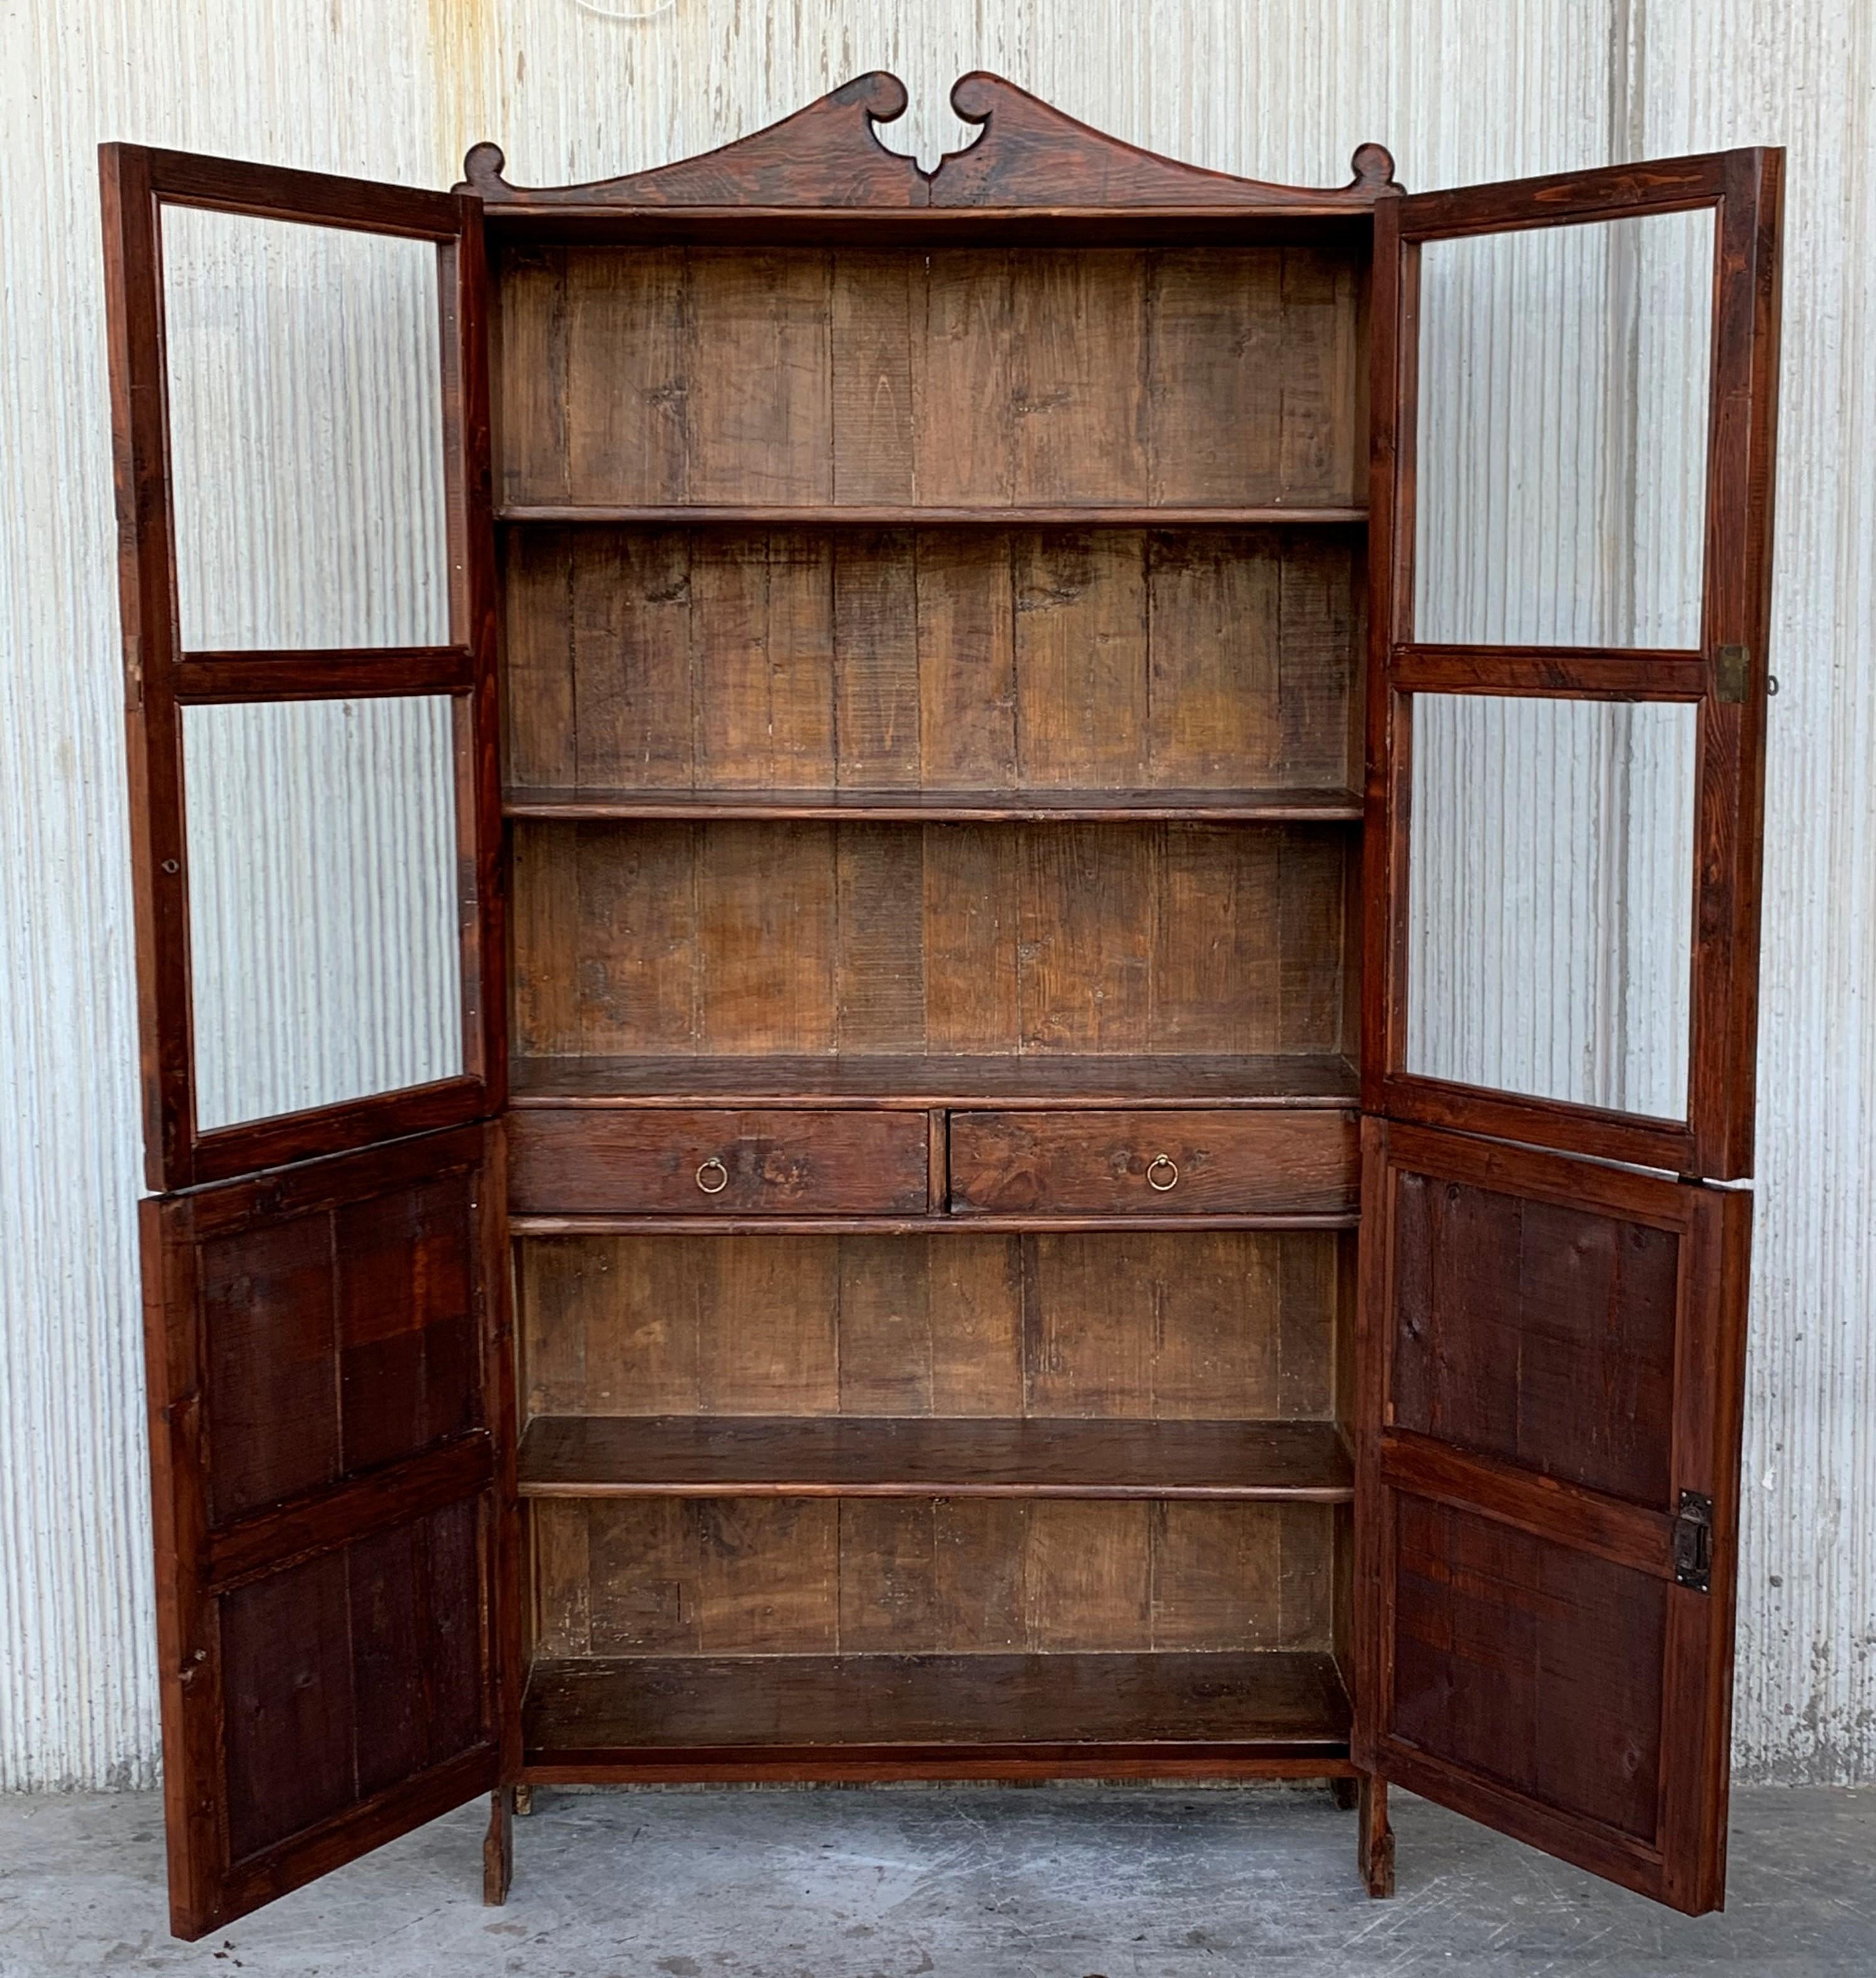 Exquisite 18th century Spanish cupboard or bookcase with glass vitrine, constructed from walnut and original glasses of this period. Features a coffered case fronted by four large doors. It has a two drawers in the low part. This massive cabinet